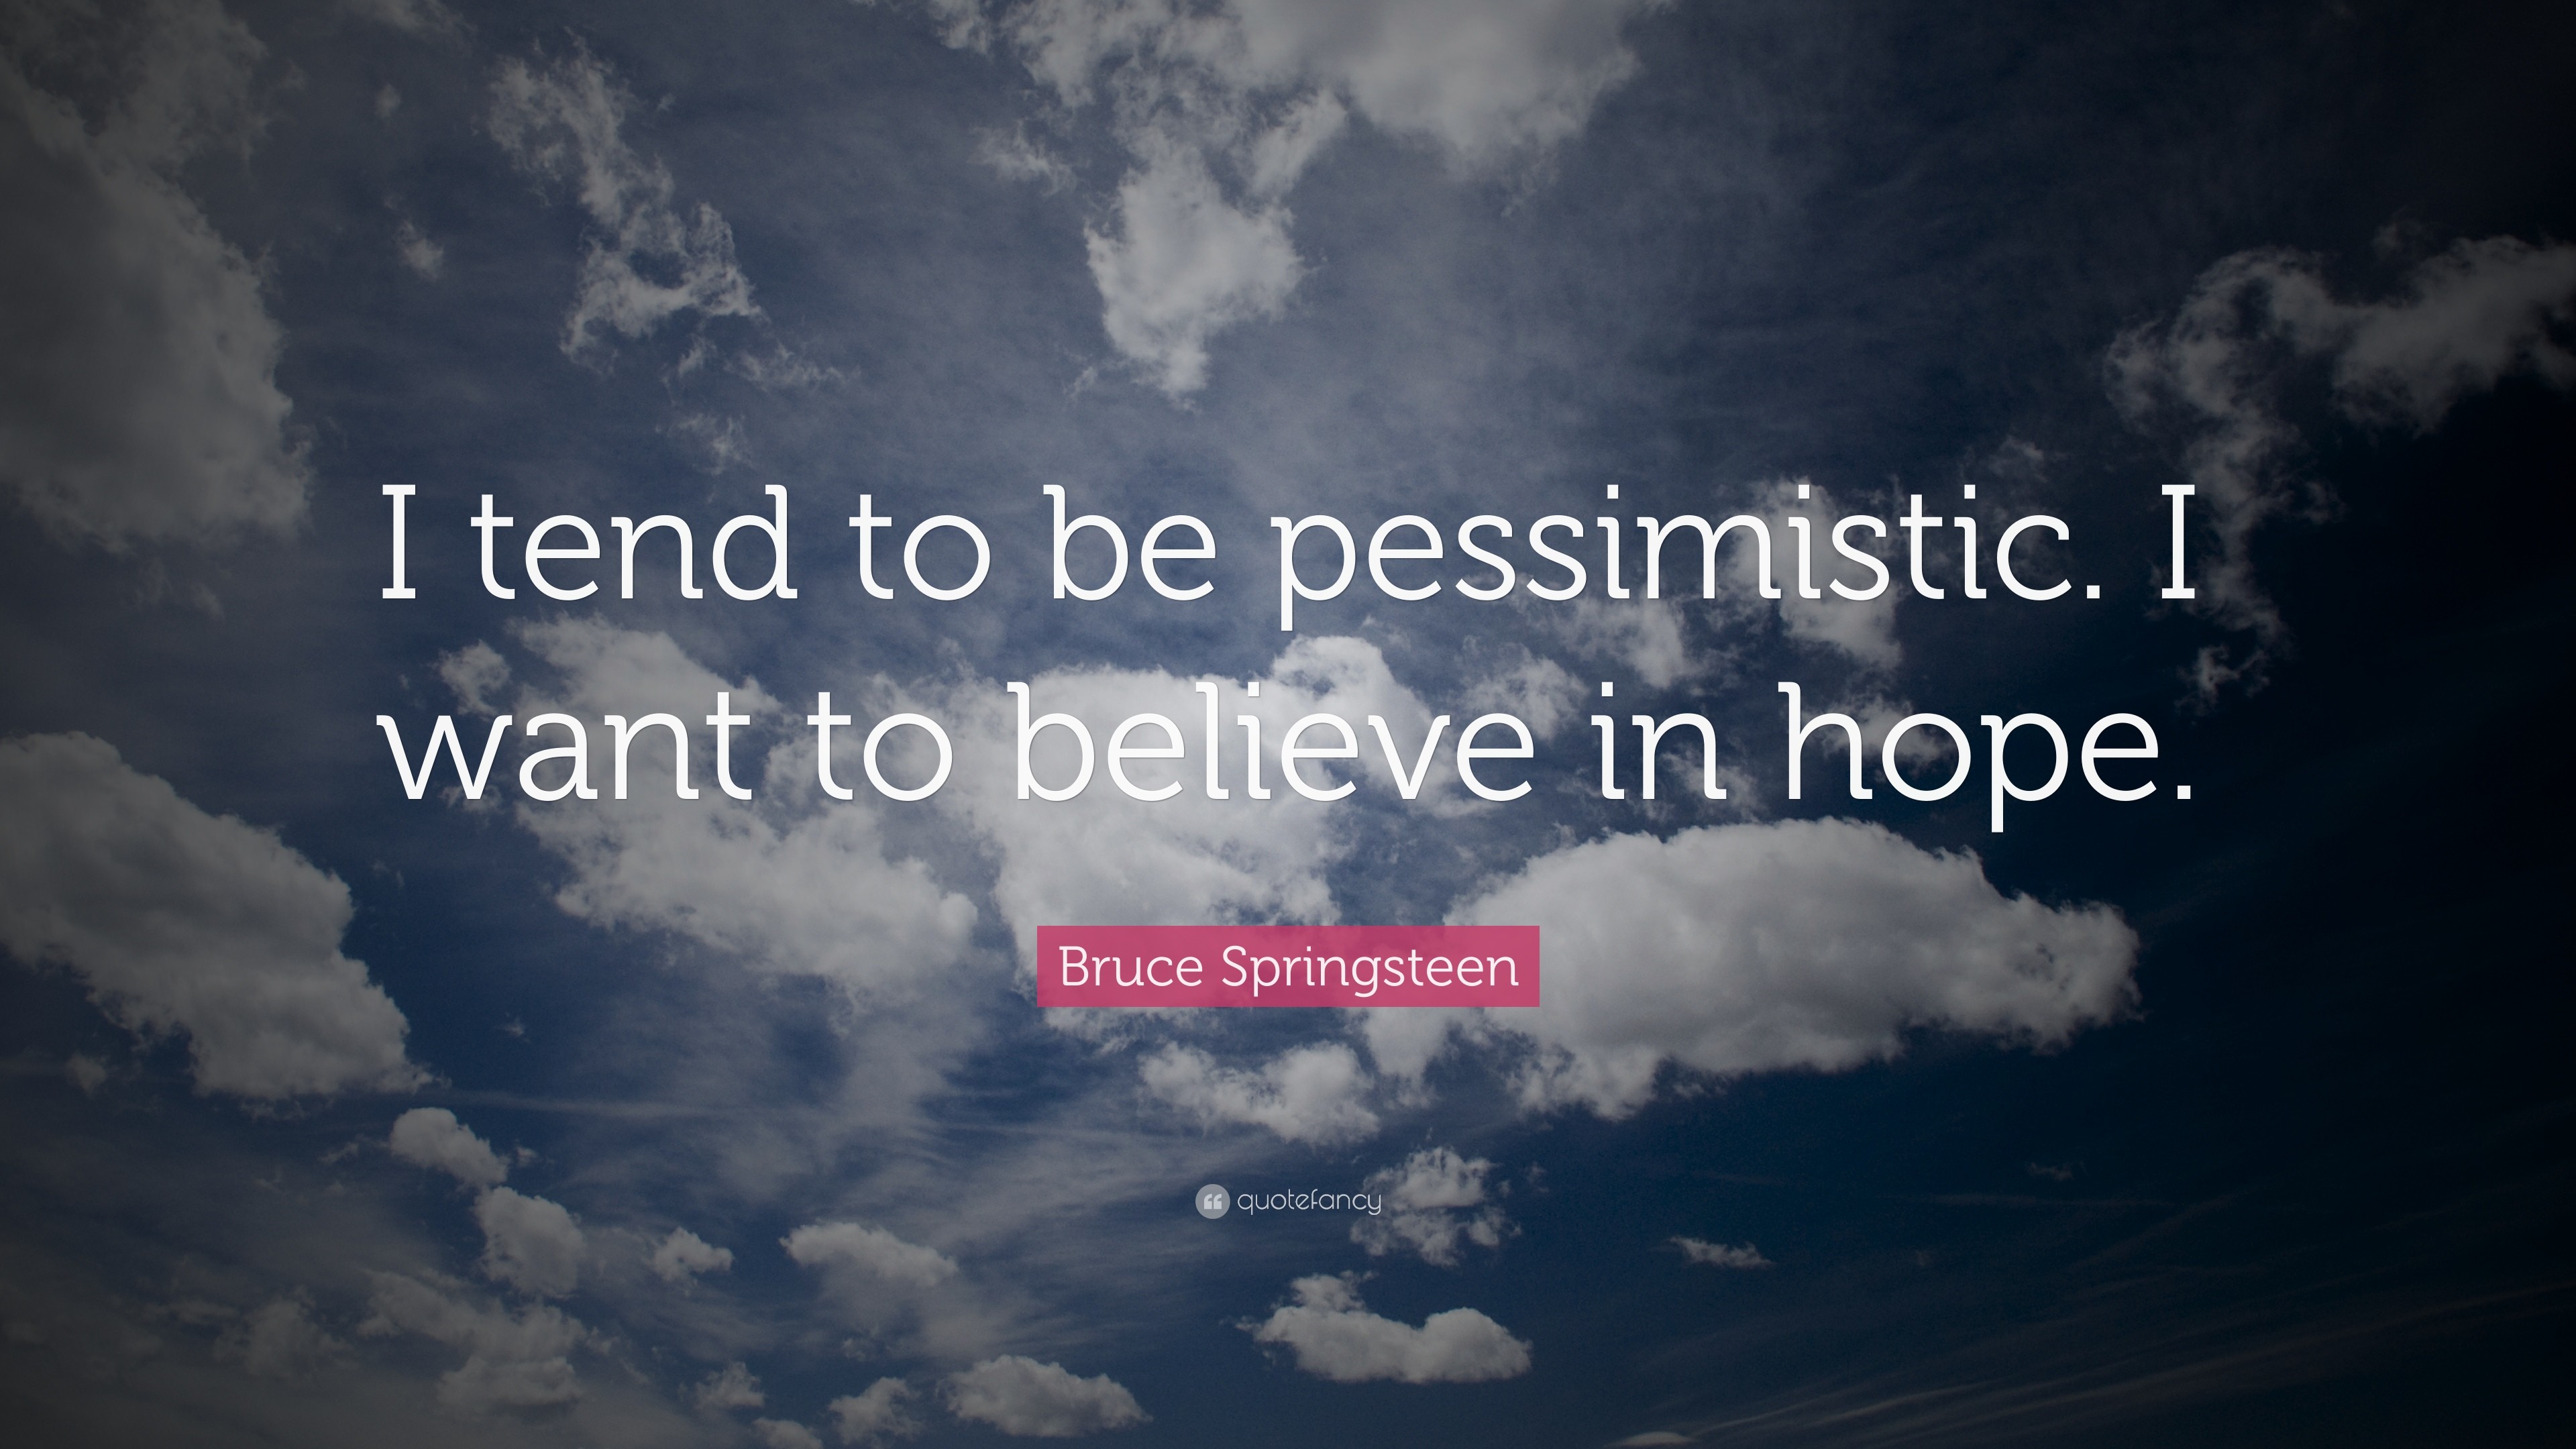 Bruce Springsteen Quote: “I tend to be pessimistic. I want to believe in